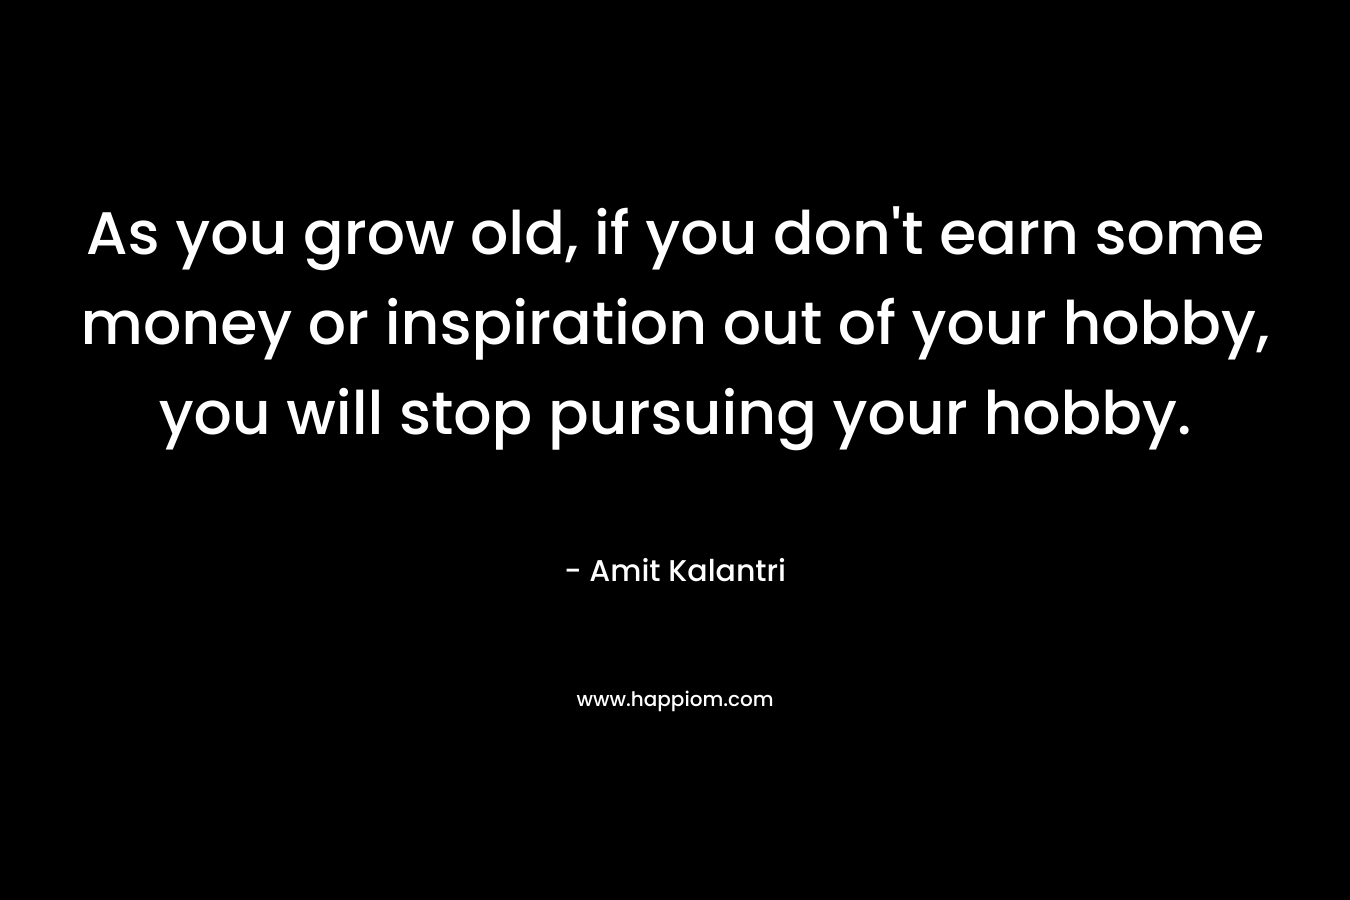 As you grow old, if you don't earn some money or inspiration out of your hobby, you will stop pursuing your hobby.